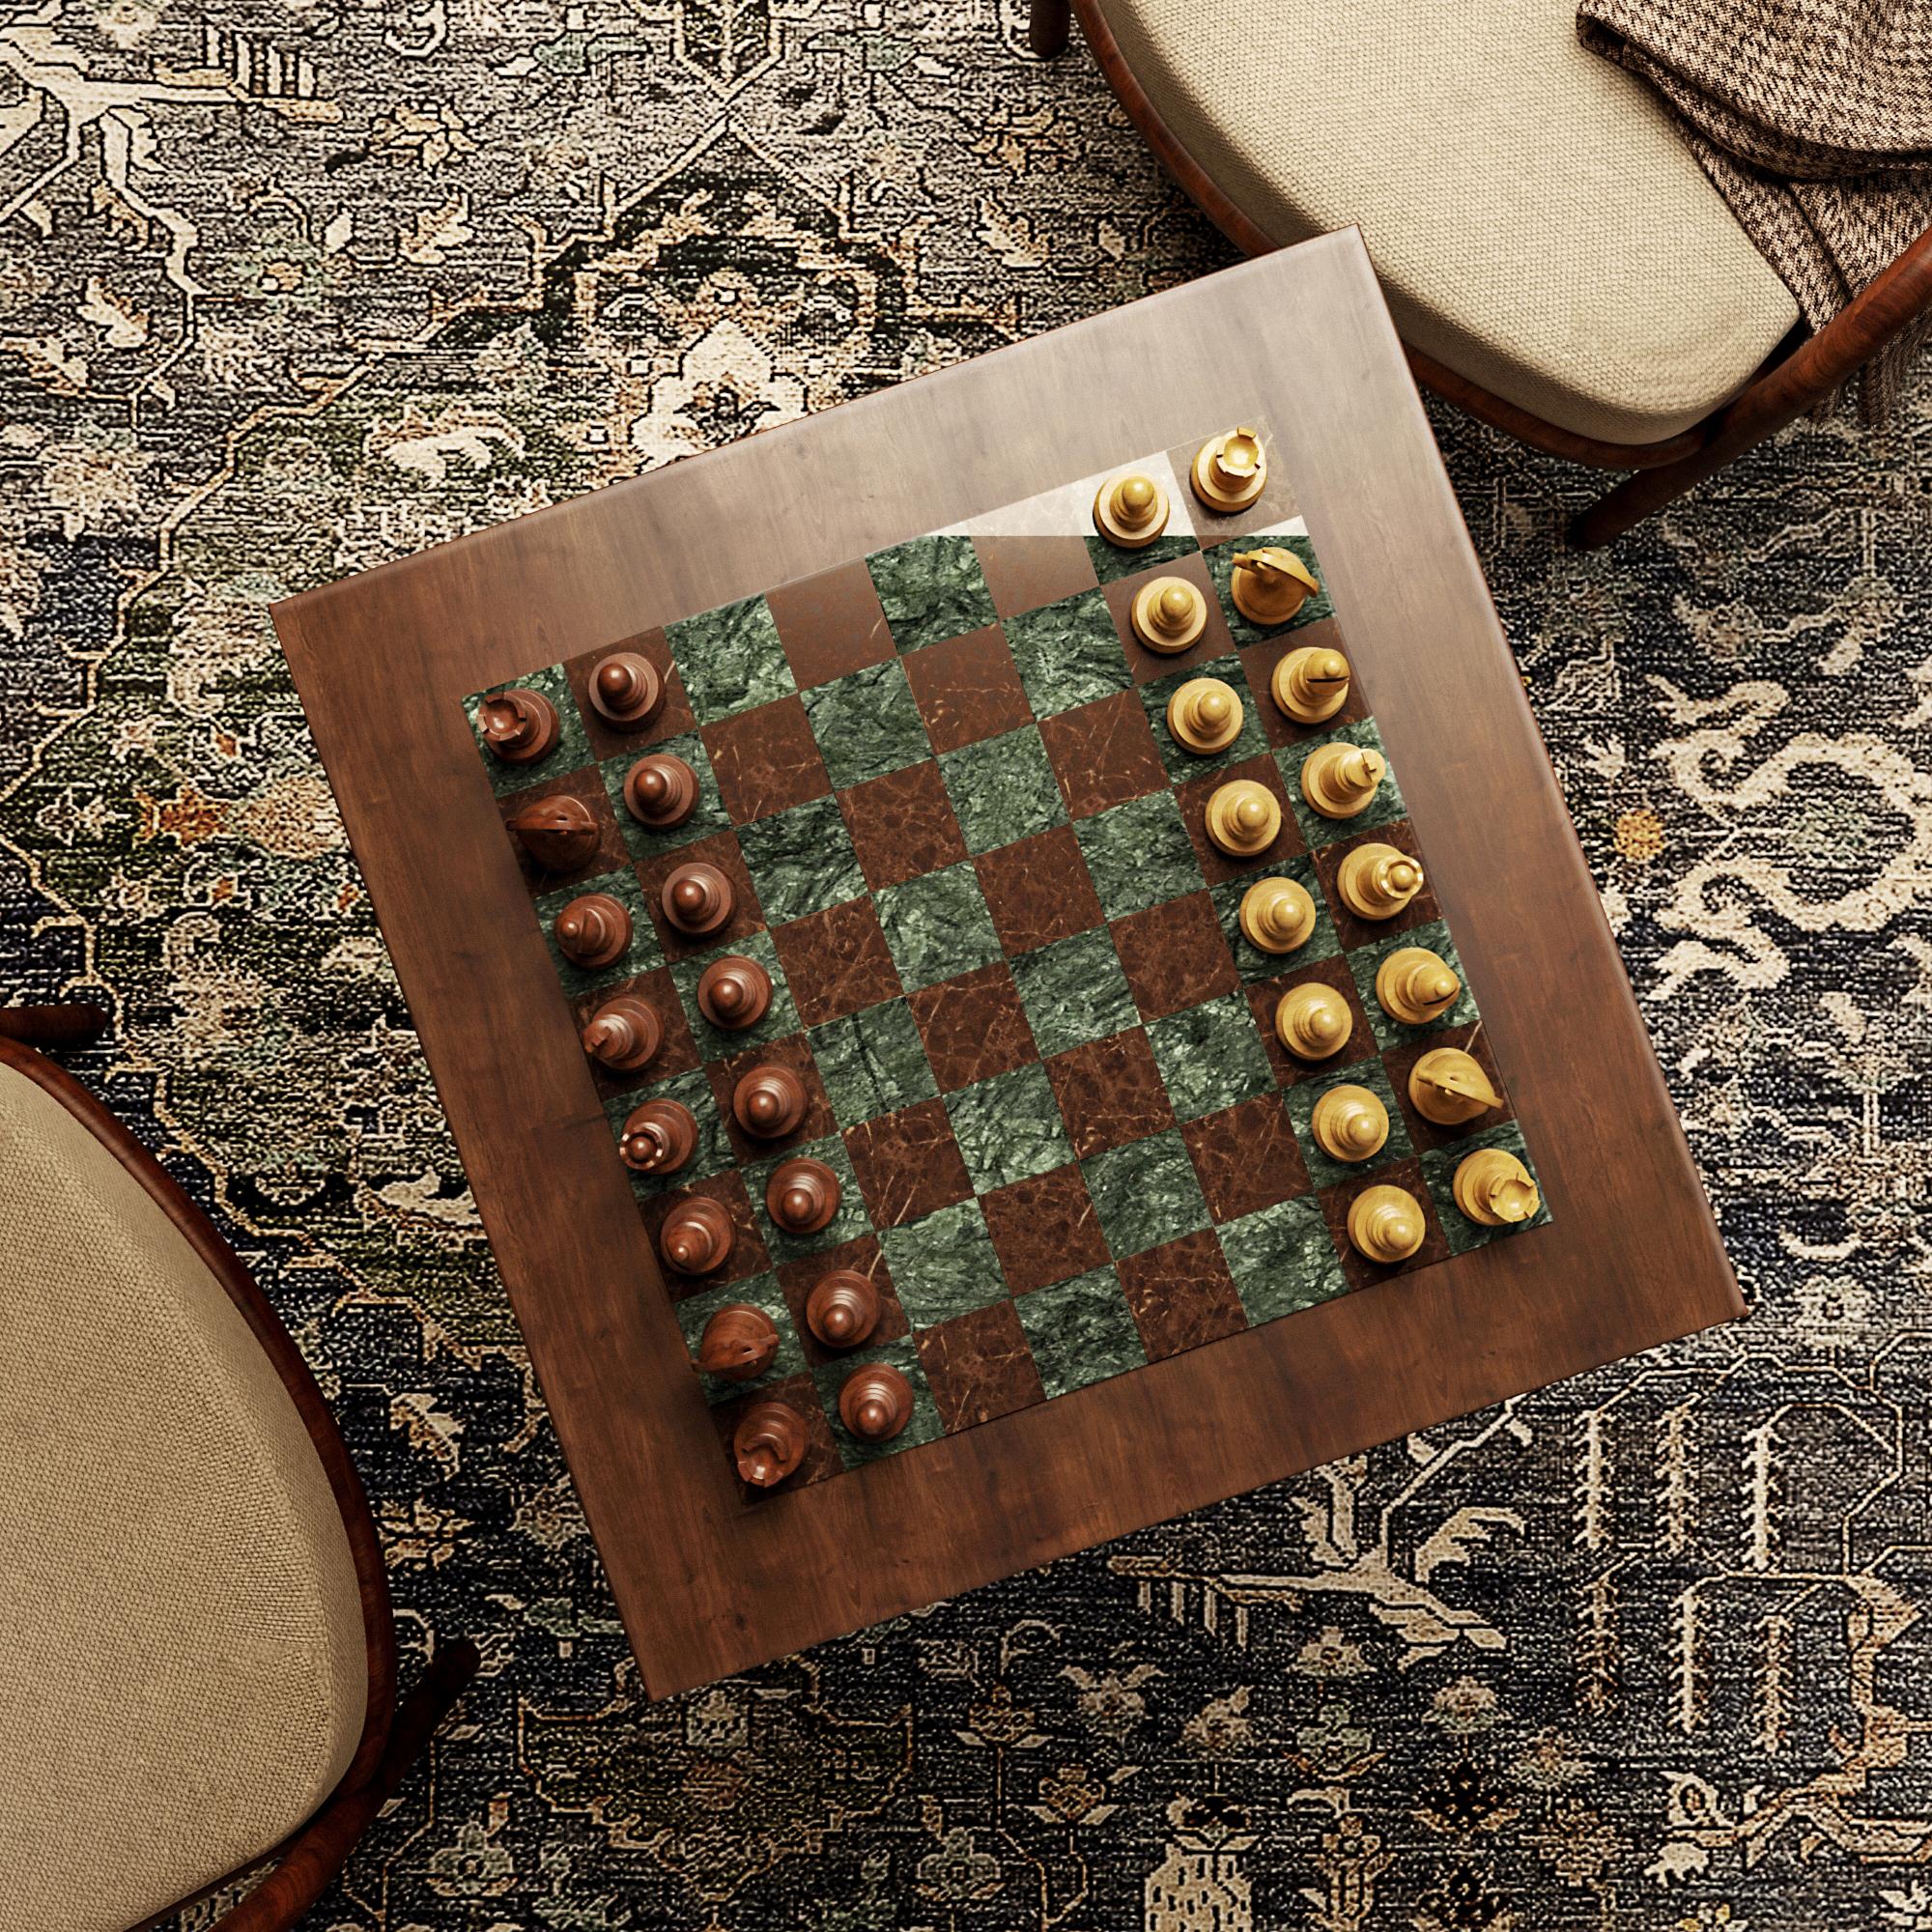 contemporary chess table